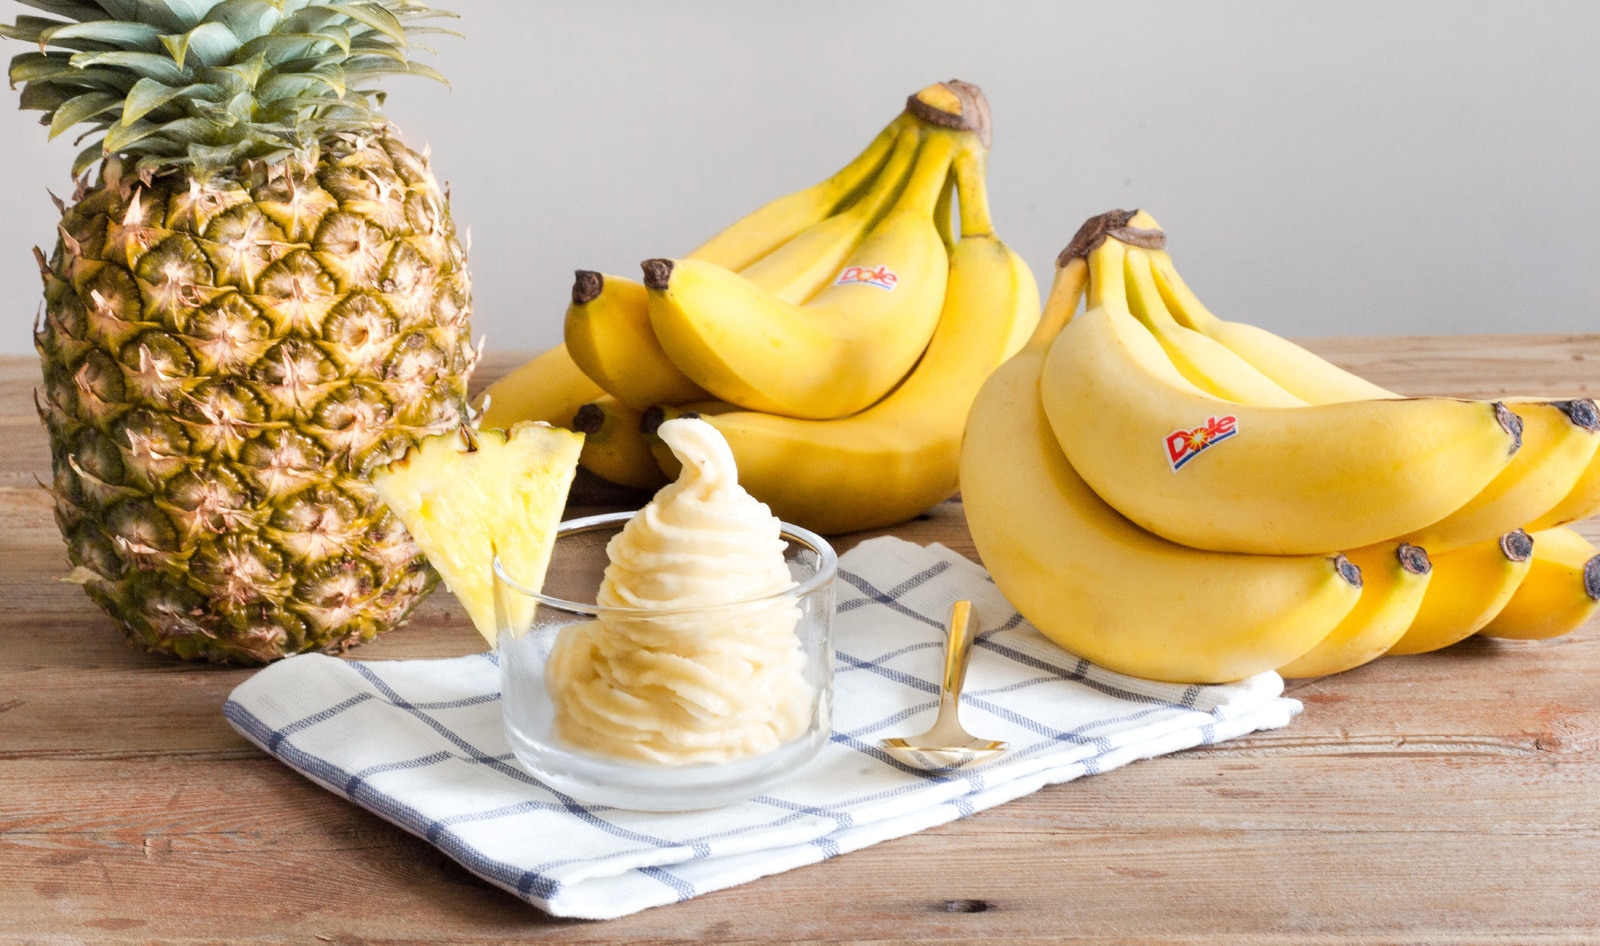 You Can Win a Vitamix for Recreating Disney’s Vegan Dole Whip